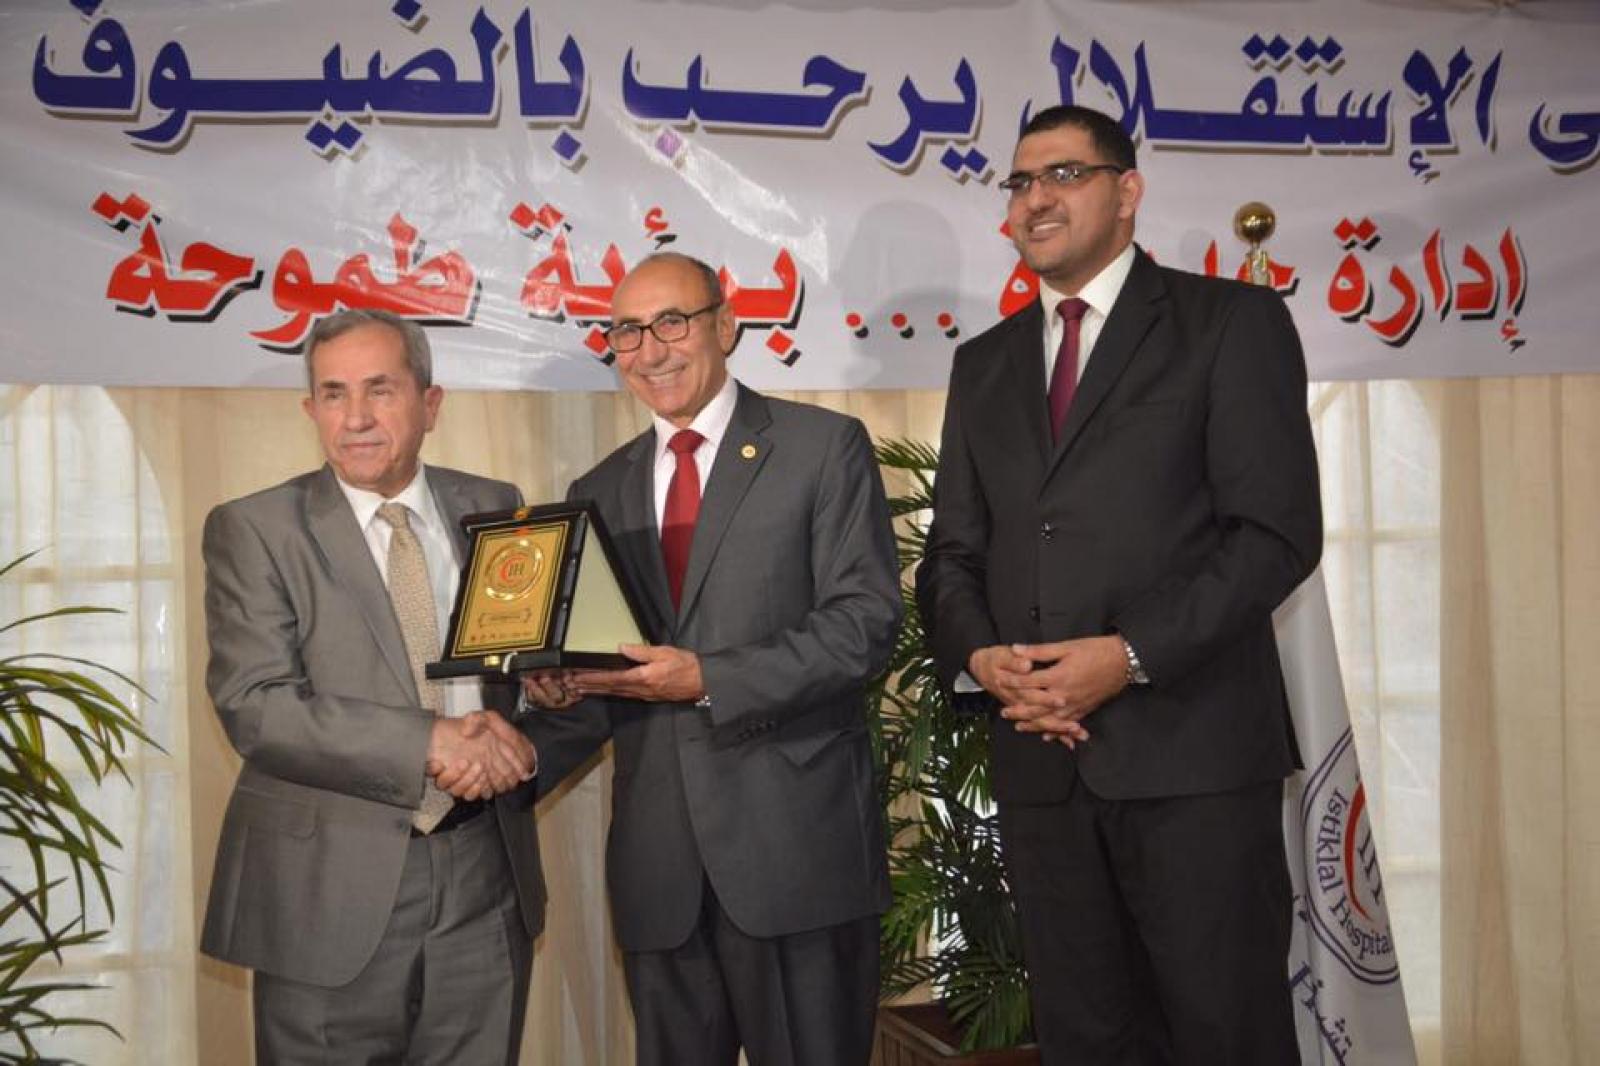 Under the patronage of His Excellency Dr. Nayef Al-Fayez, Chairman of the Board of Directors, Al-Istiklal Hospital held a ceremony for the Independenc